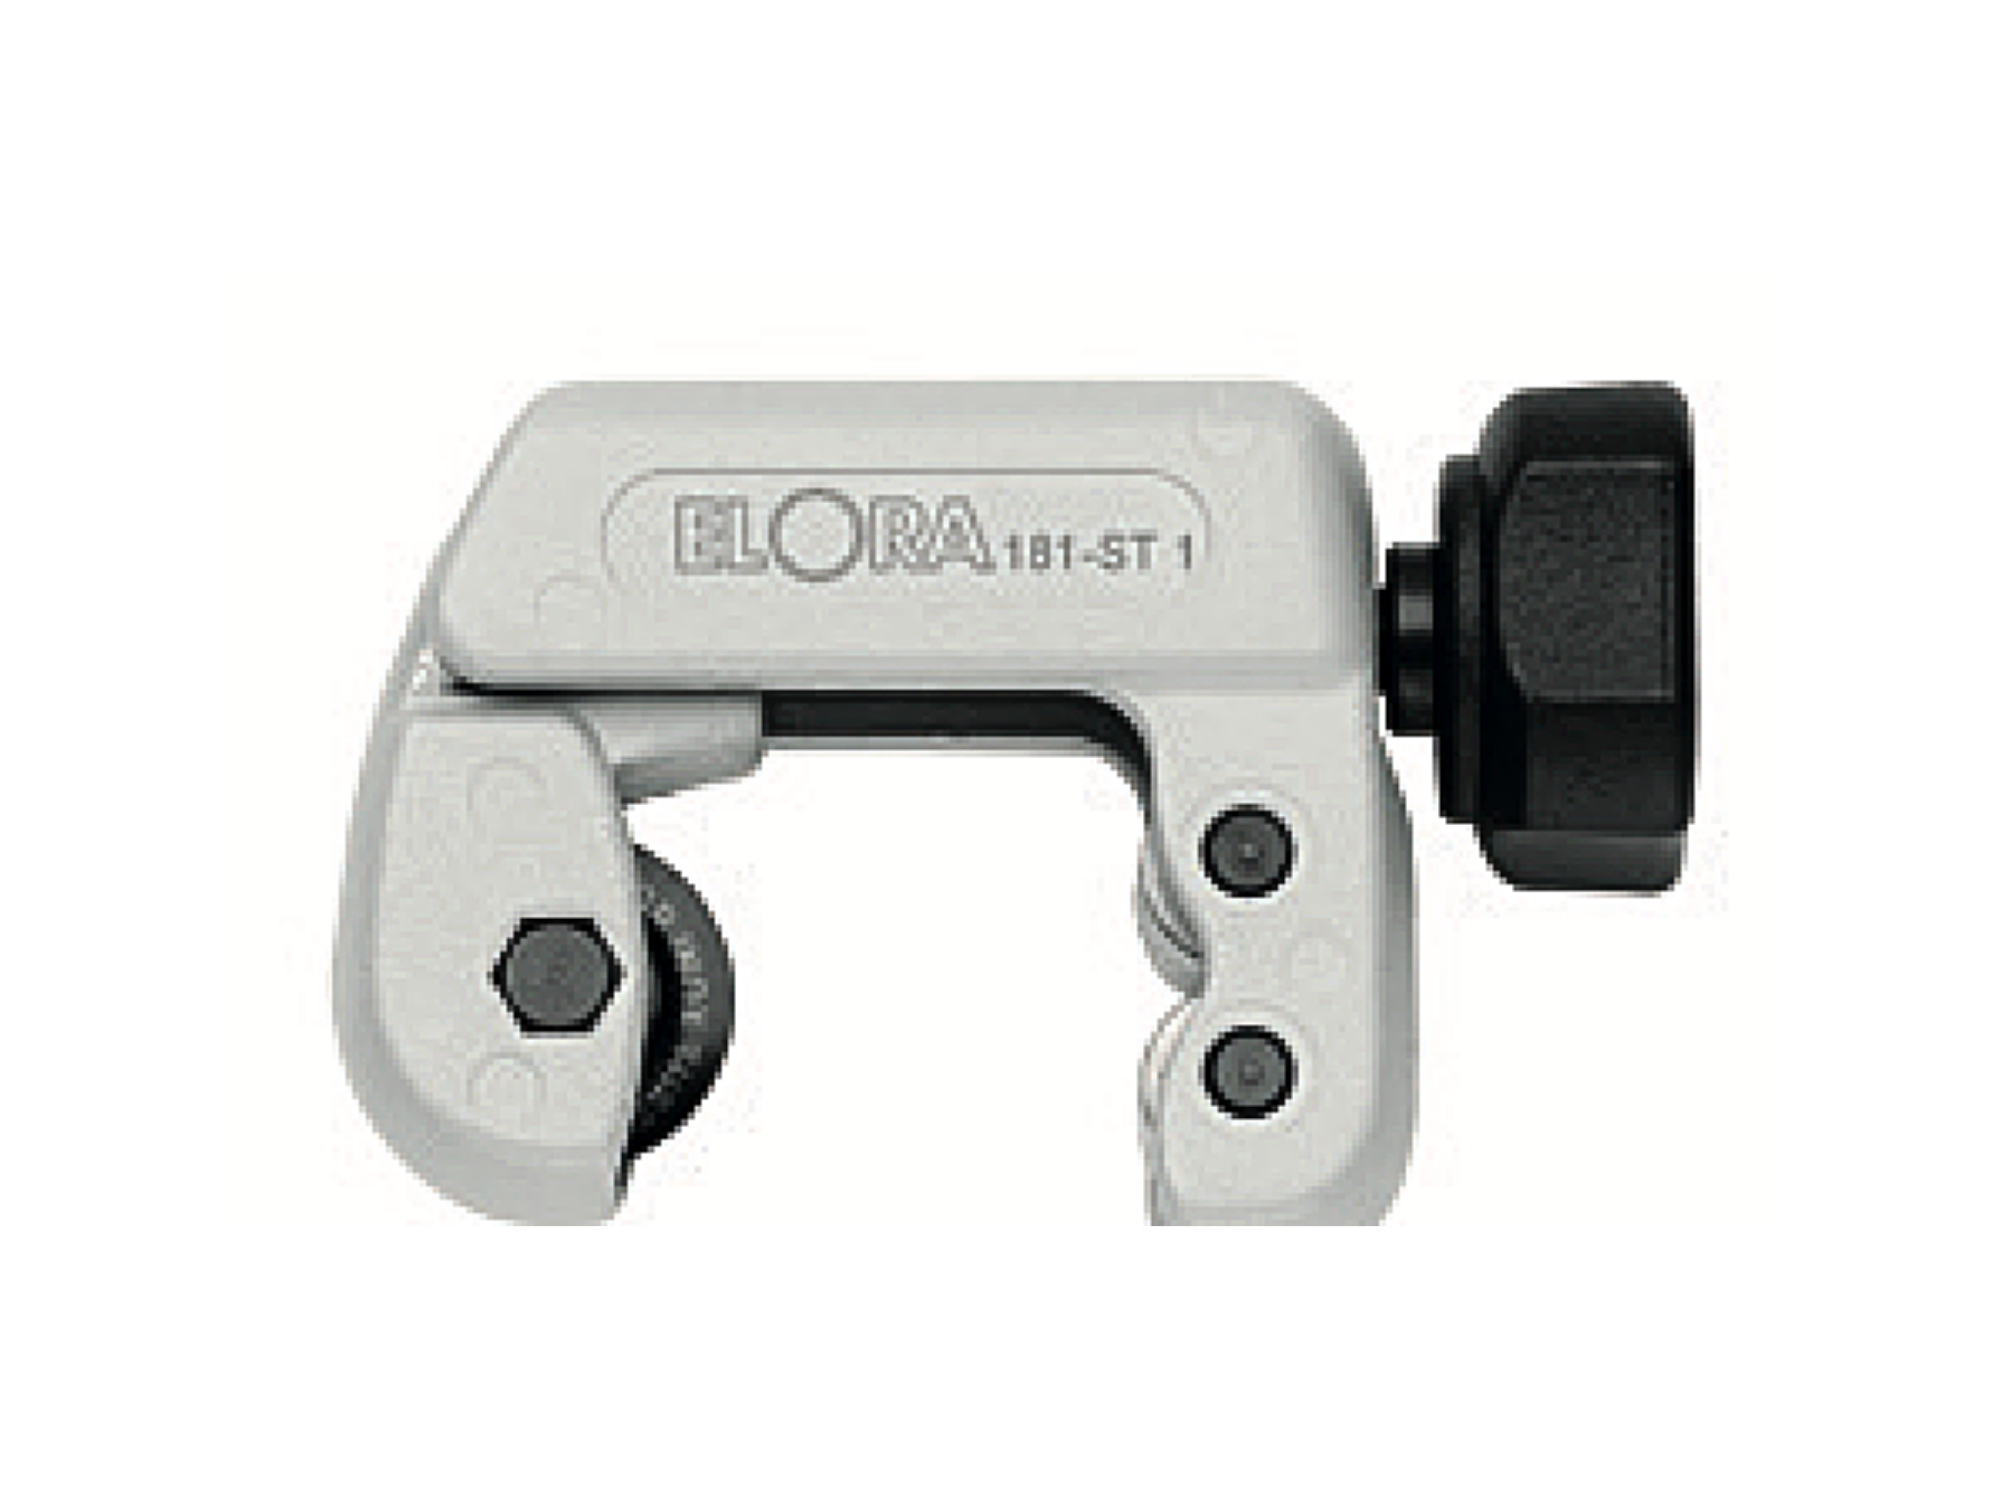 ELORA 181-ST3 Pipe Cutter For Thin-Walled Metal Tube 6-76 mm / 1/4-3" - Premium Pipe Cutter from ELORA - Shop now at Yew Aik.